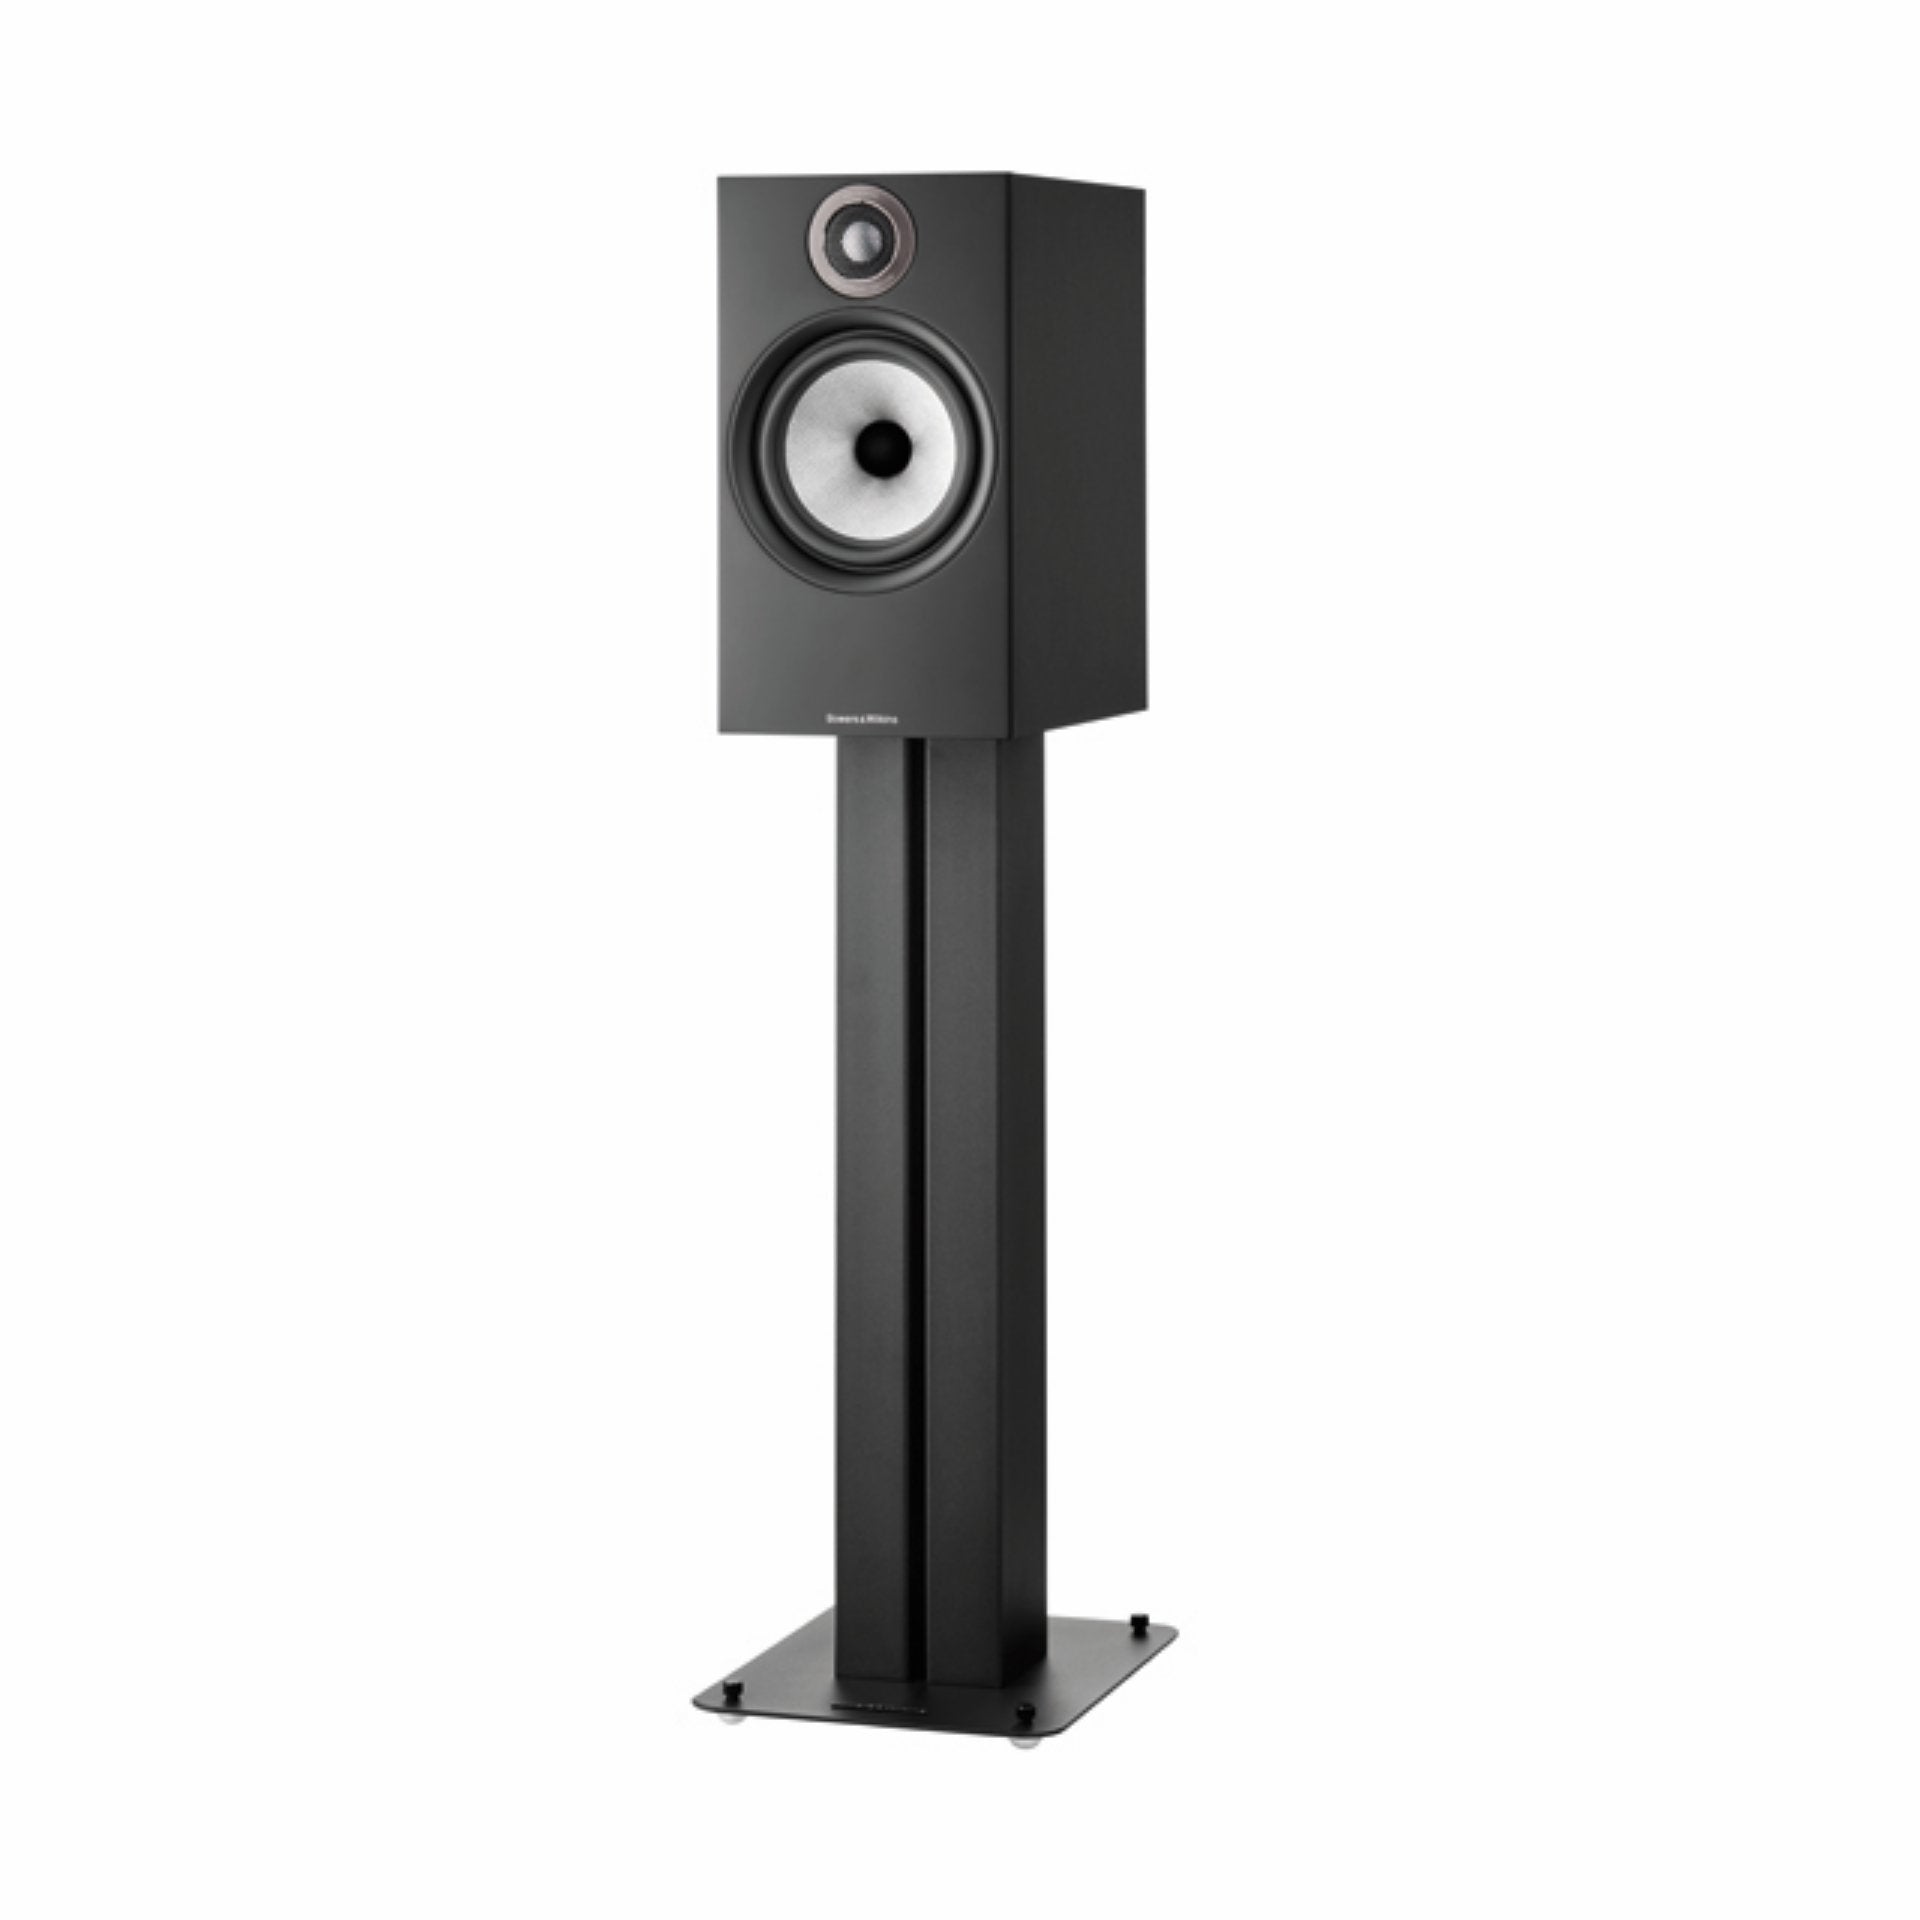 Bowers & Wilkins 606 S2 Anniversary Edition now available at Qubix Technologies, Bangalore, India. Bowers & Wilkins Products Available for Purchase at Qubix Technologies, Bangalore. Home Theaters Available for Purchase at Qubix Technologies, Bangalore